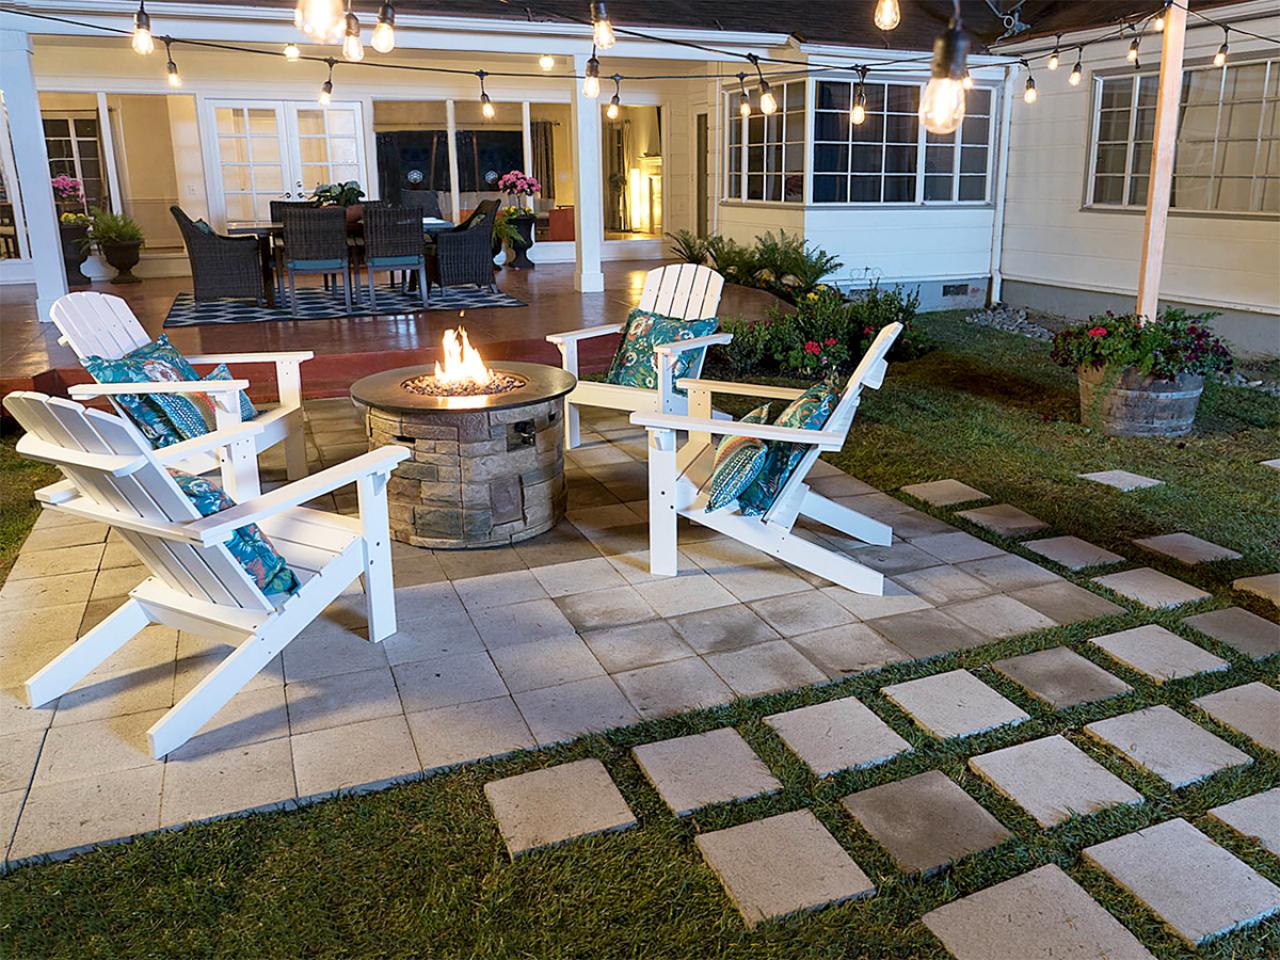 How To Lay A Paver Patio For Firepit, How To Build A Fire Pit With Brick Pavers